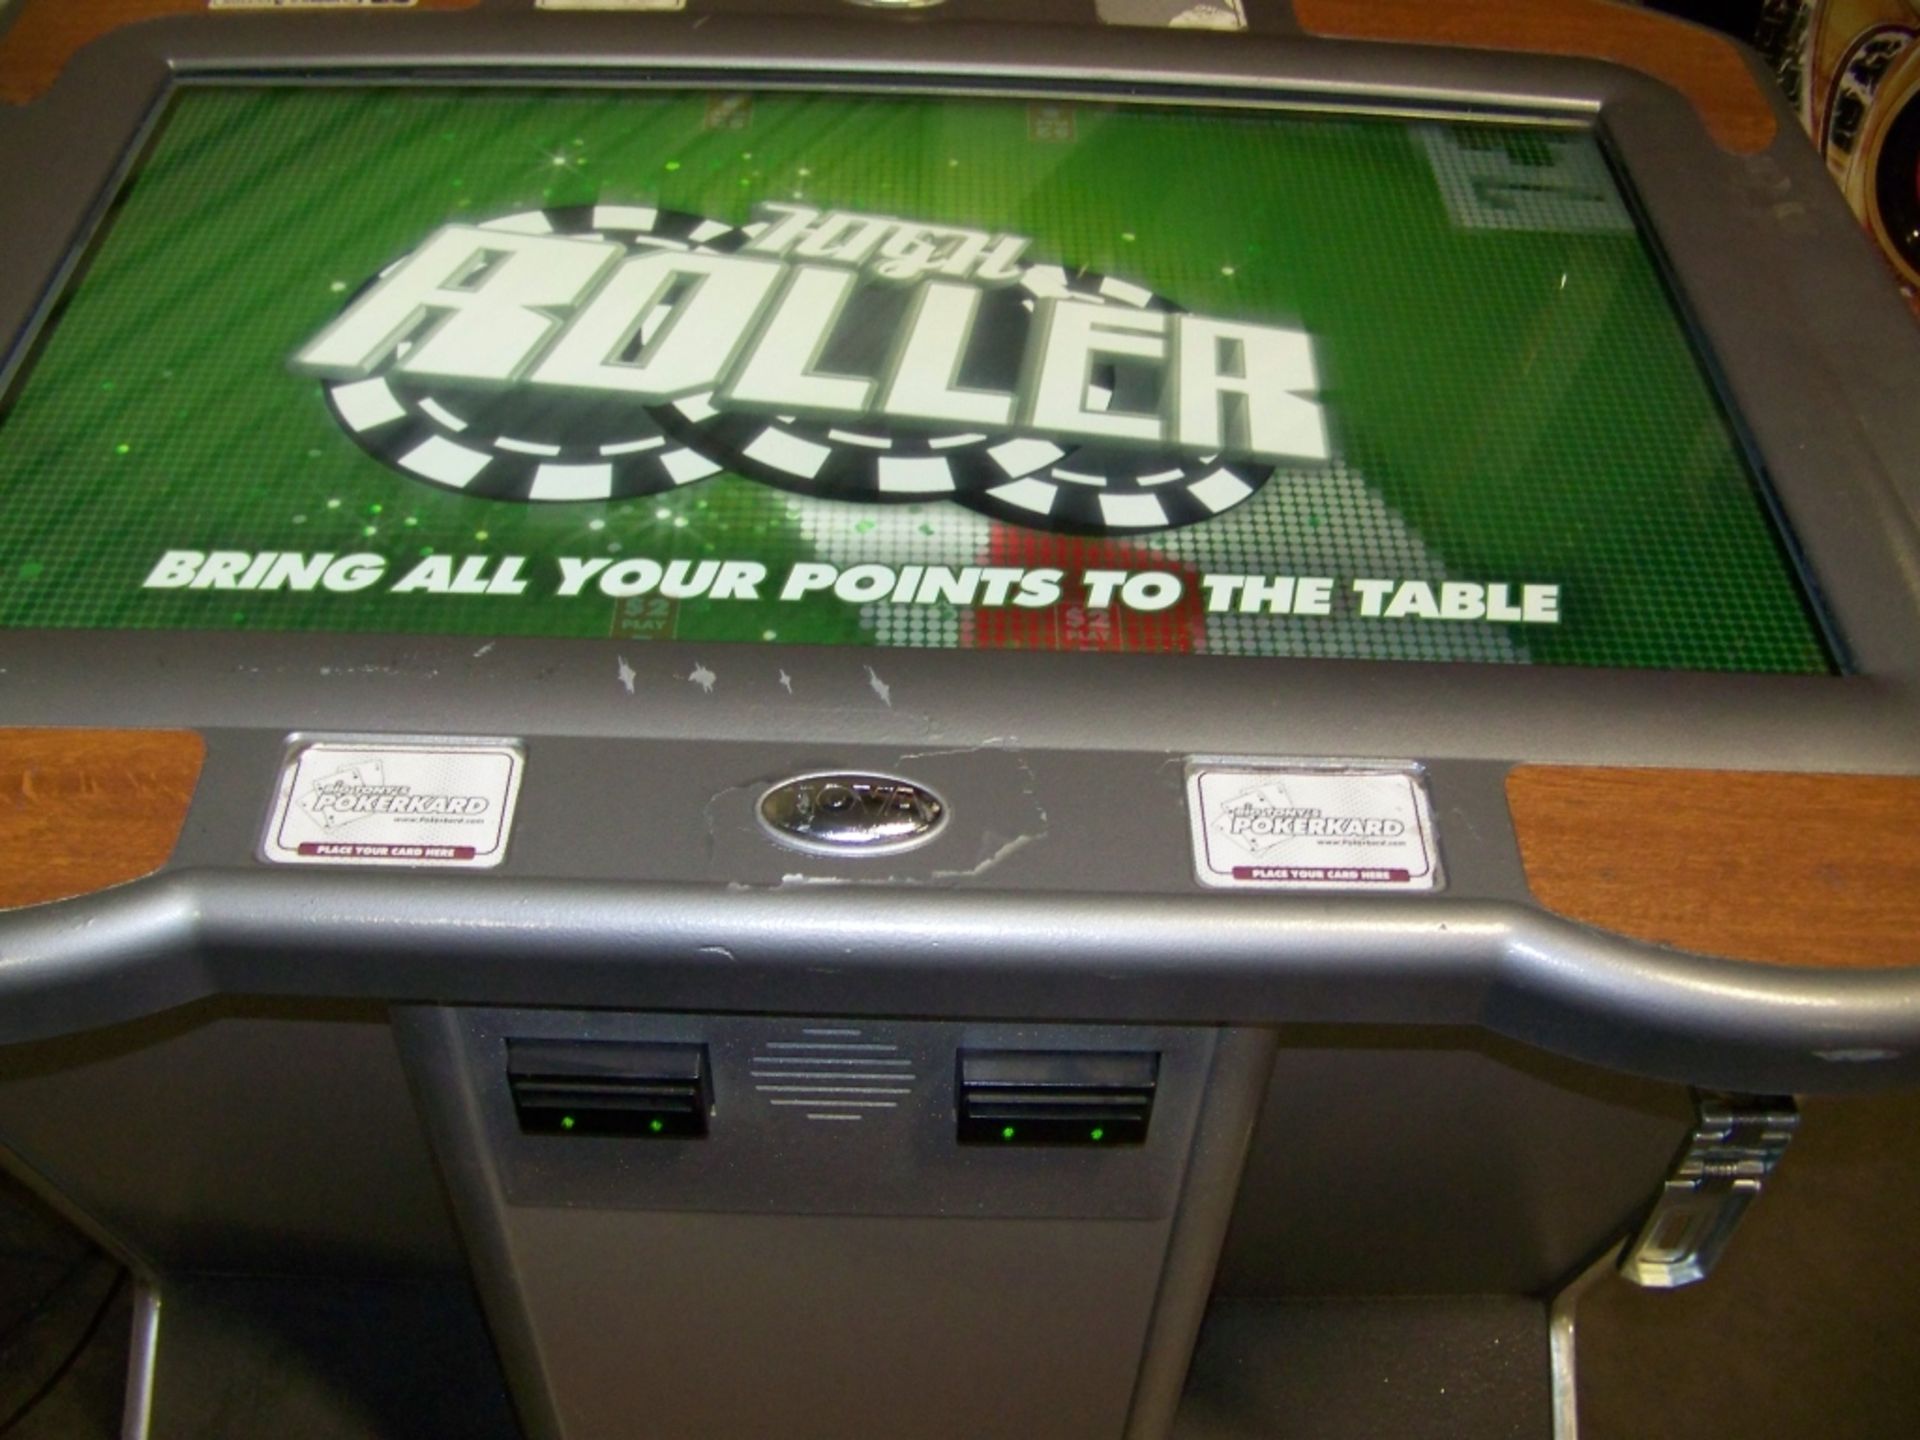 BIG TONY TEXAS HOLD'EM POKER ARCADE GAME Item is in used condition. Evidence of wear and - Image 2 of 10